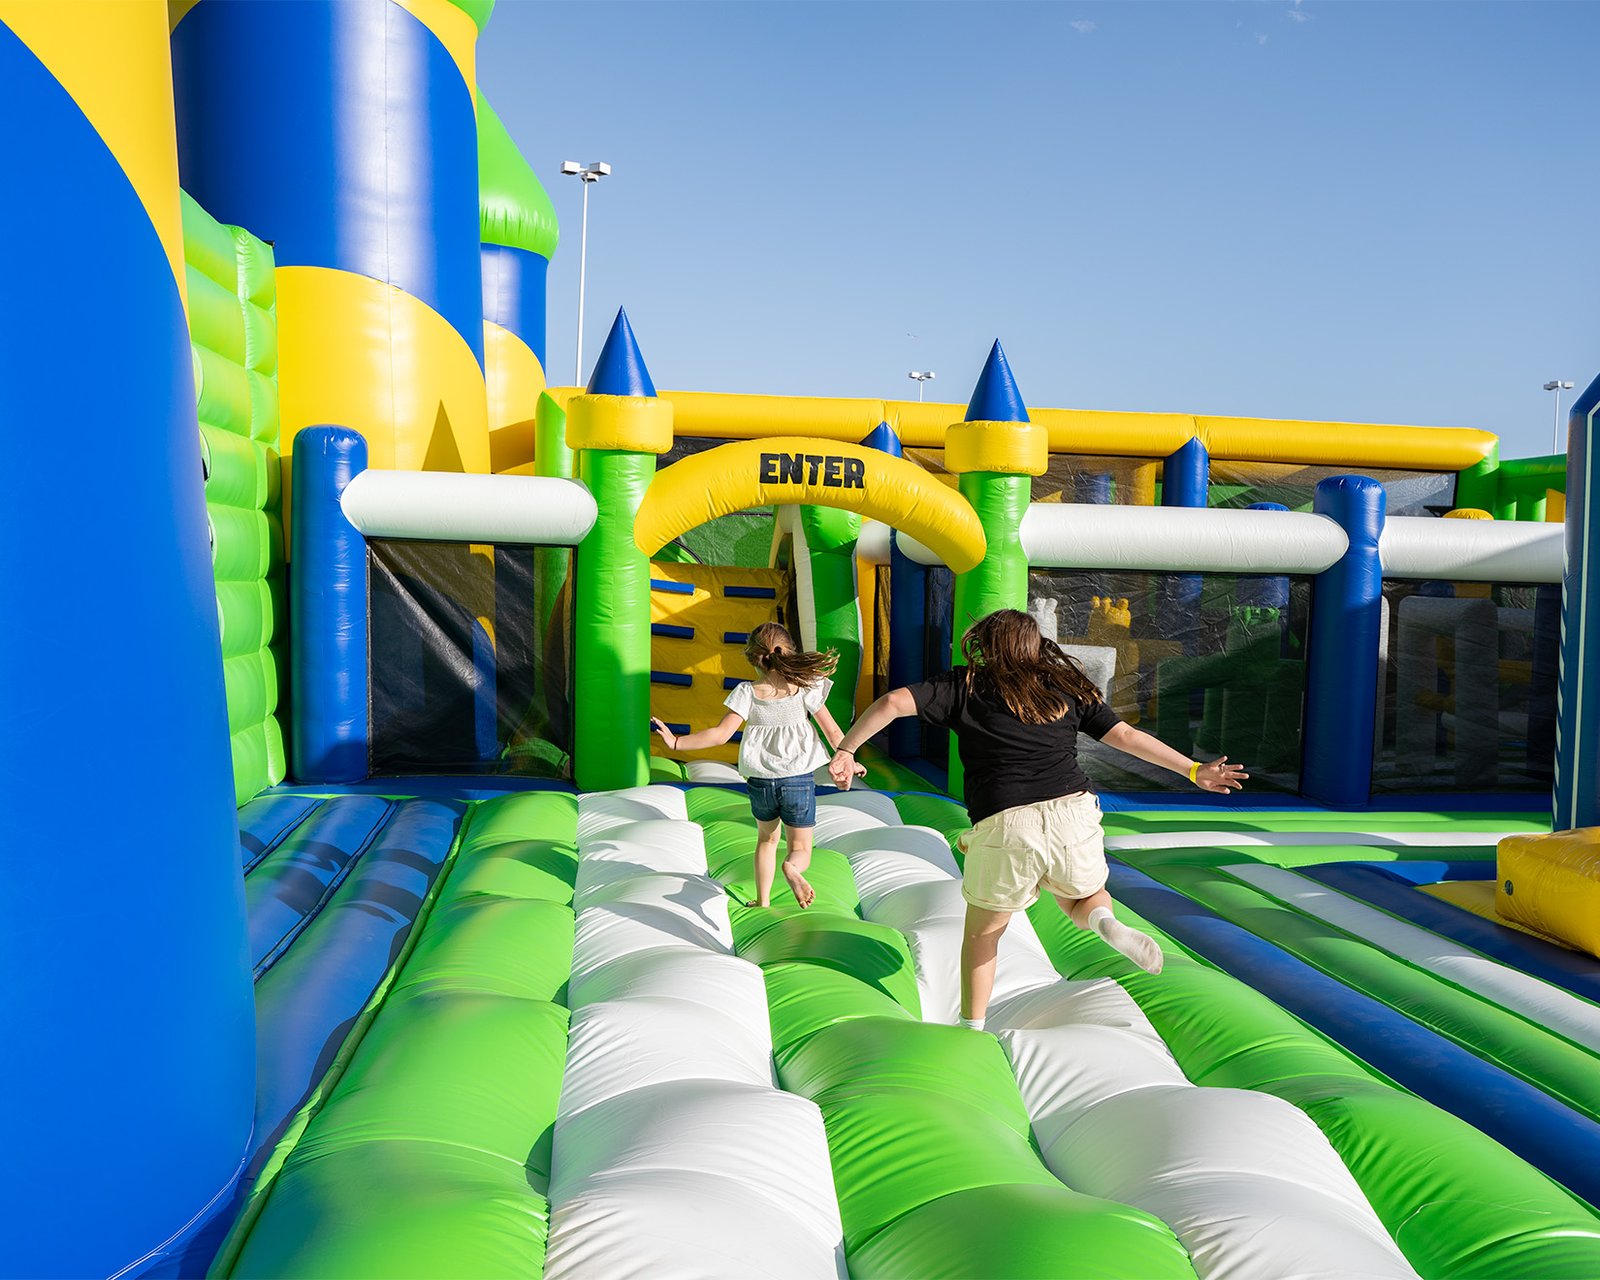 Two girls entering an obstacle course at one of the world's largest bounce houses